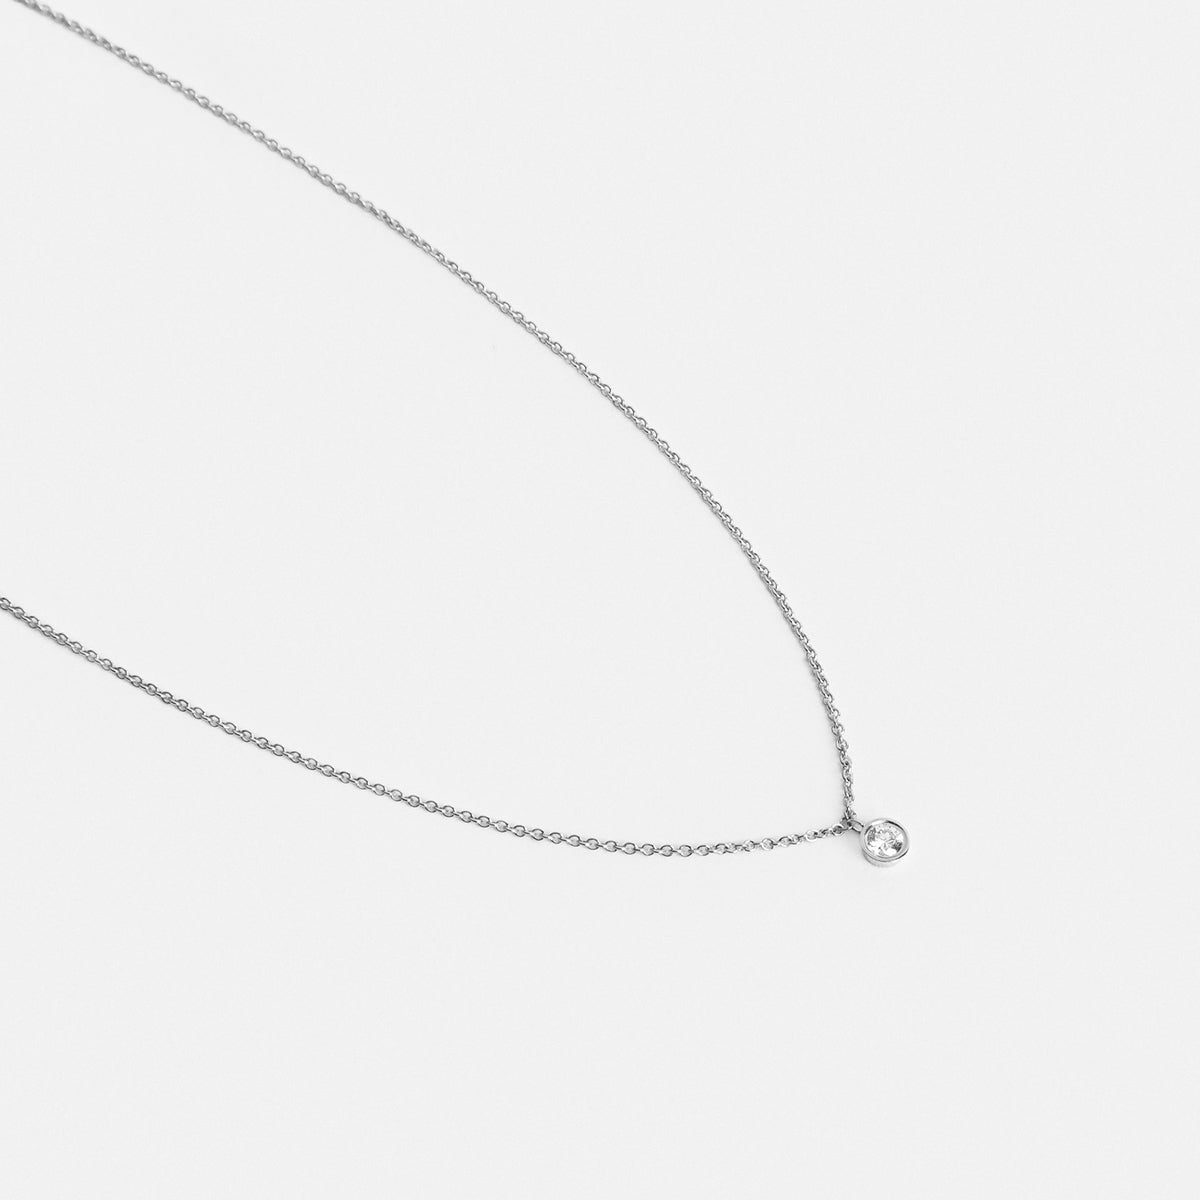 Large Kaya Simple Necklace in 14k White Gold set with White Diamond By SHW Fine Jewelry NYC